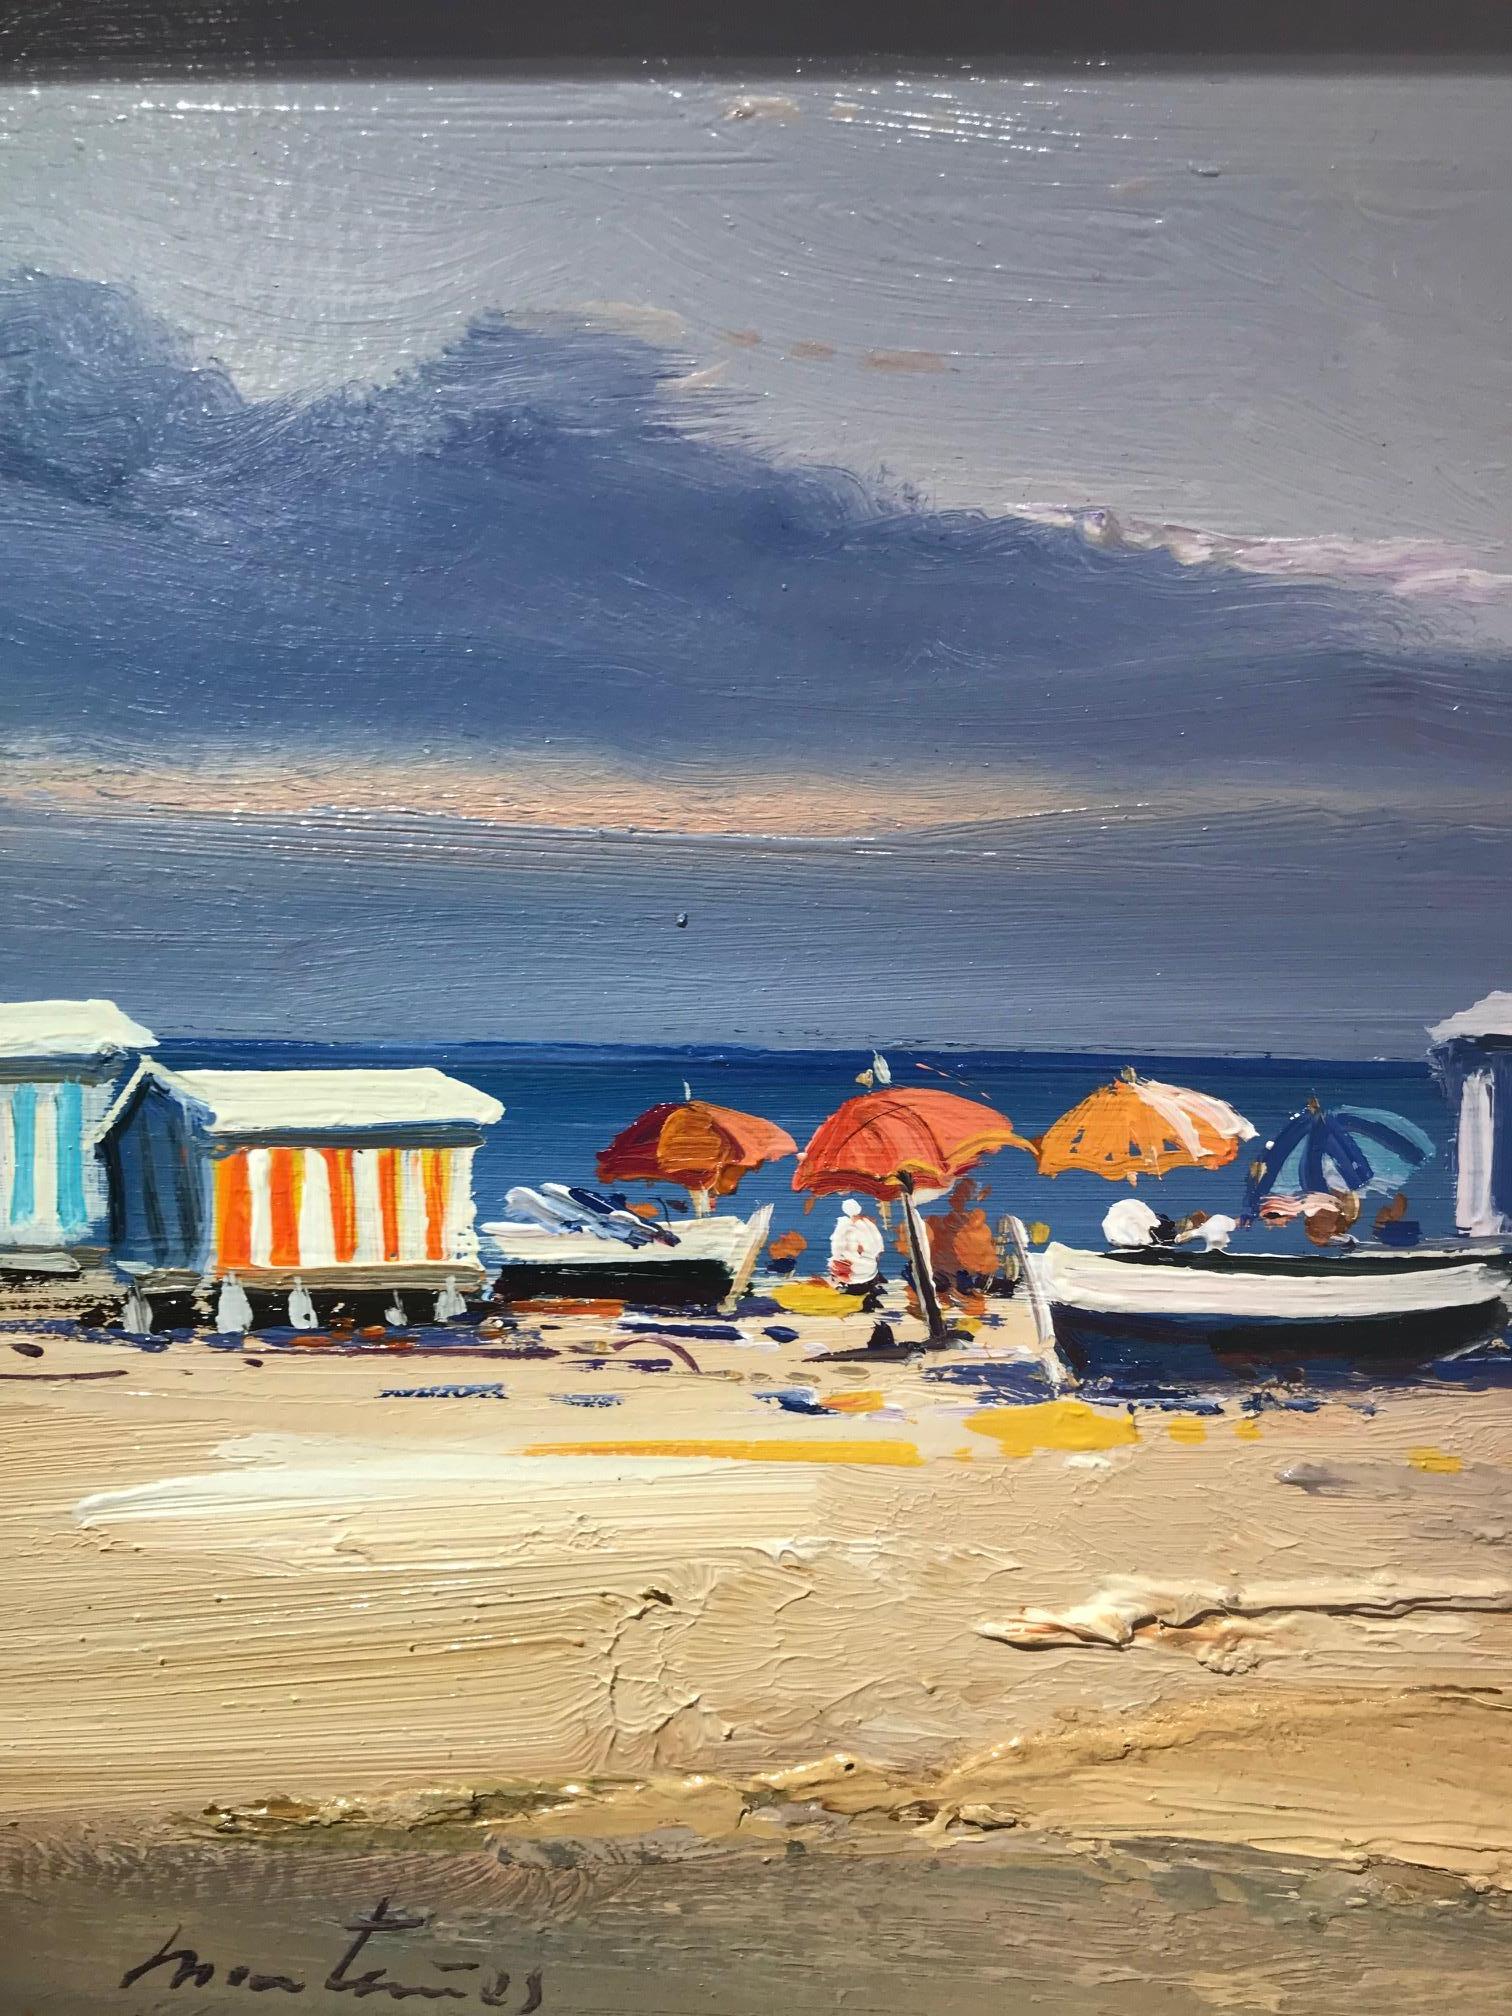 A warm and beautiful contemporary beach scene 'Beach Day' by E. Martinez. This stunning seascape has a soft and natural colour palette, pale blues and earthy cool tones are subtle and mellow. Interesting textures create a warm and balanced